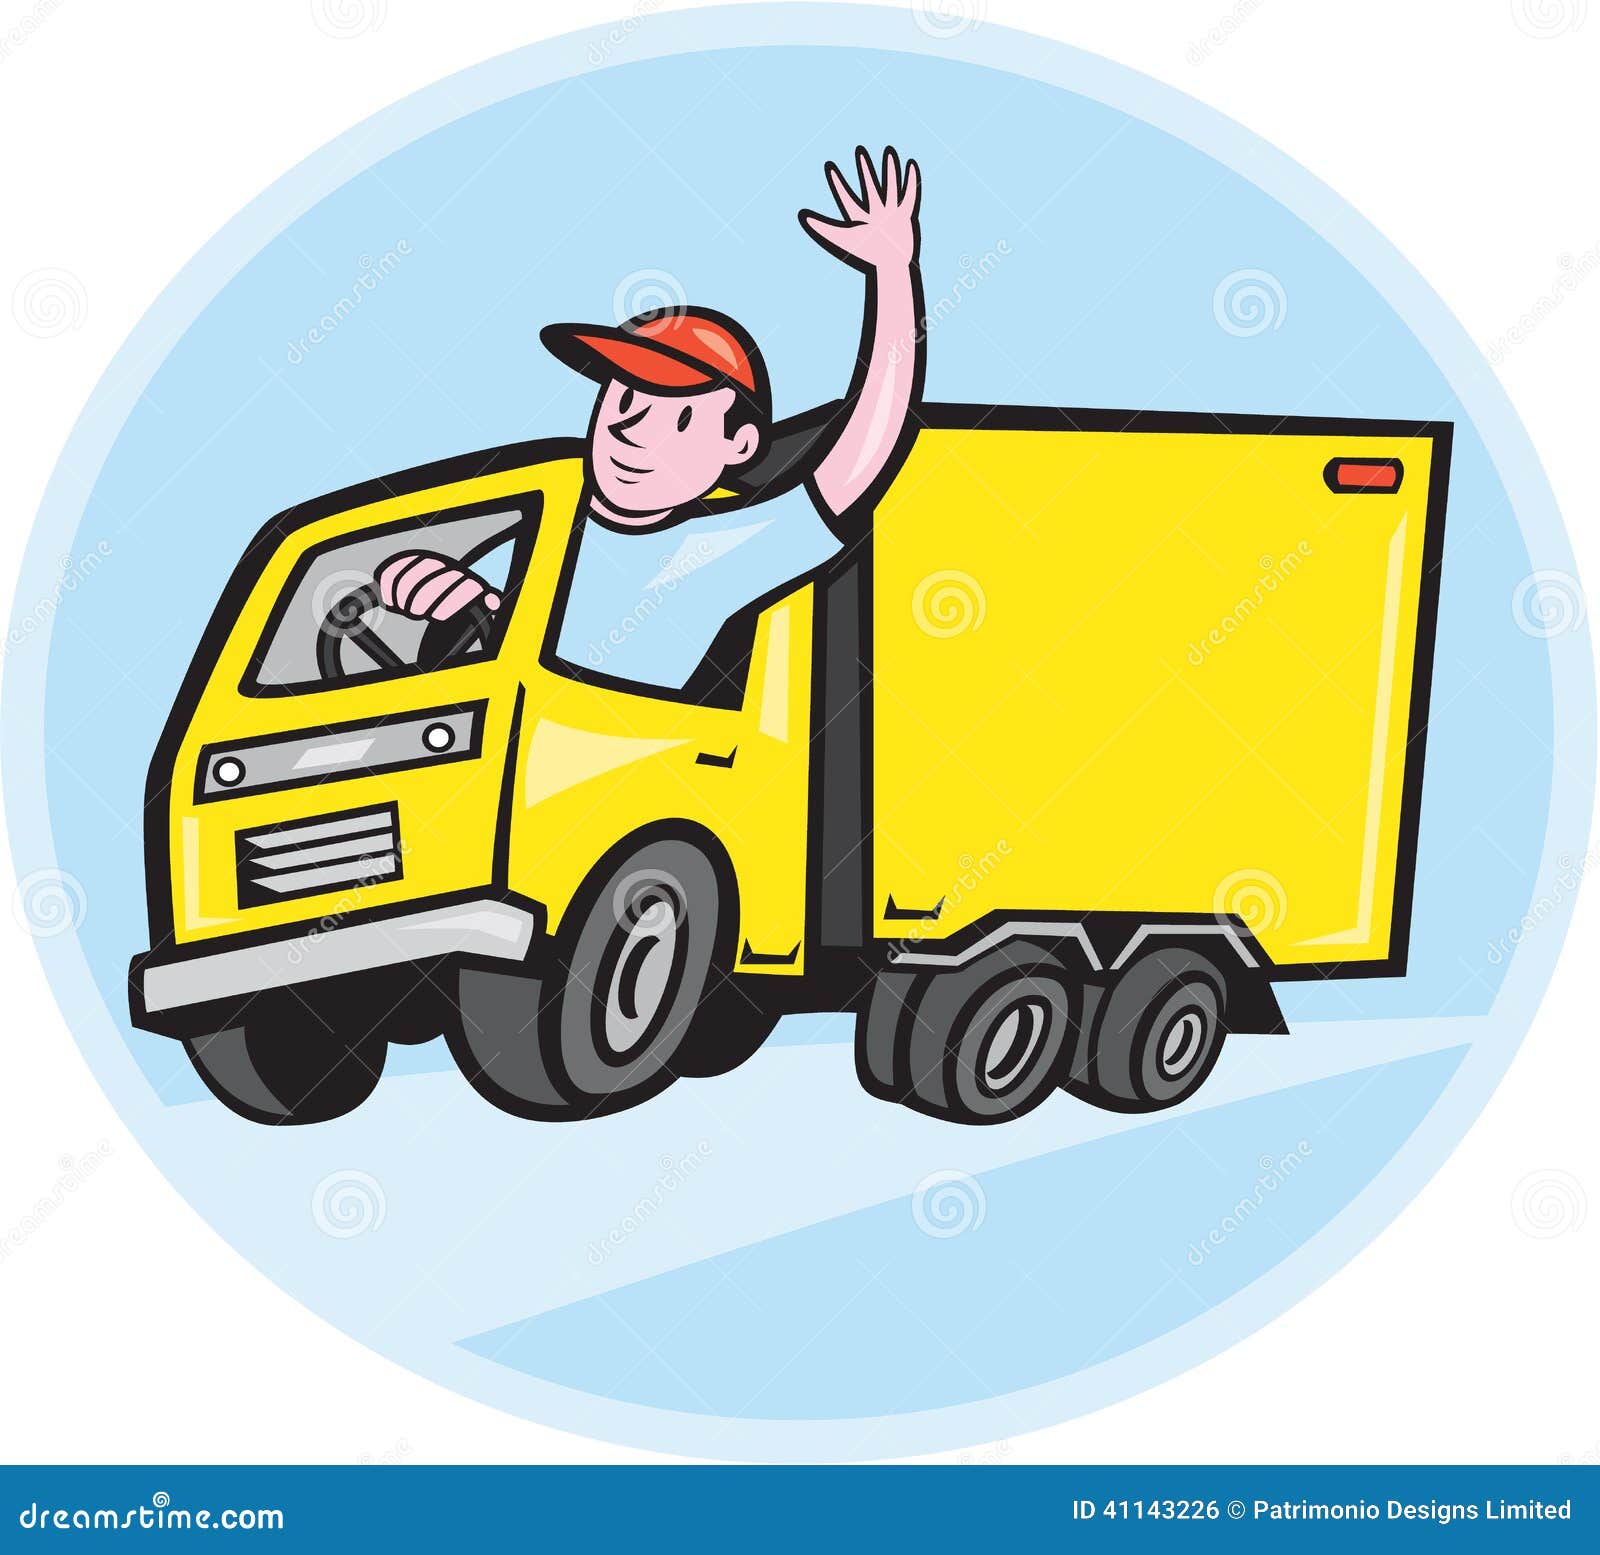 mr. clipart car'n truck collection - photo #28